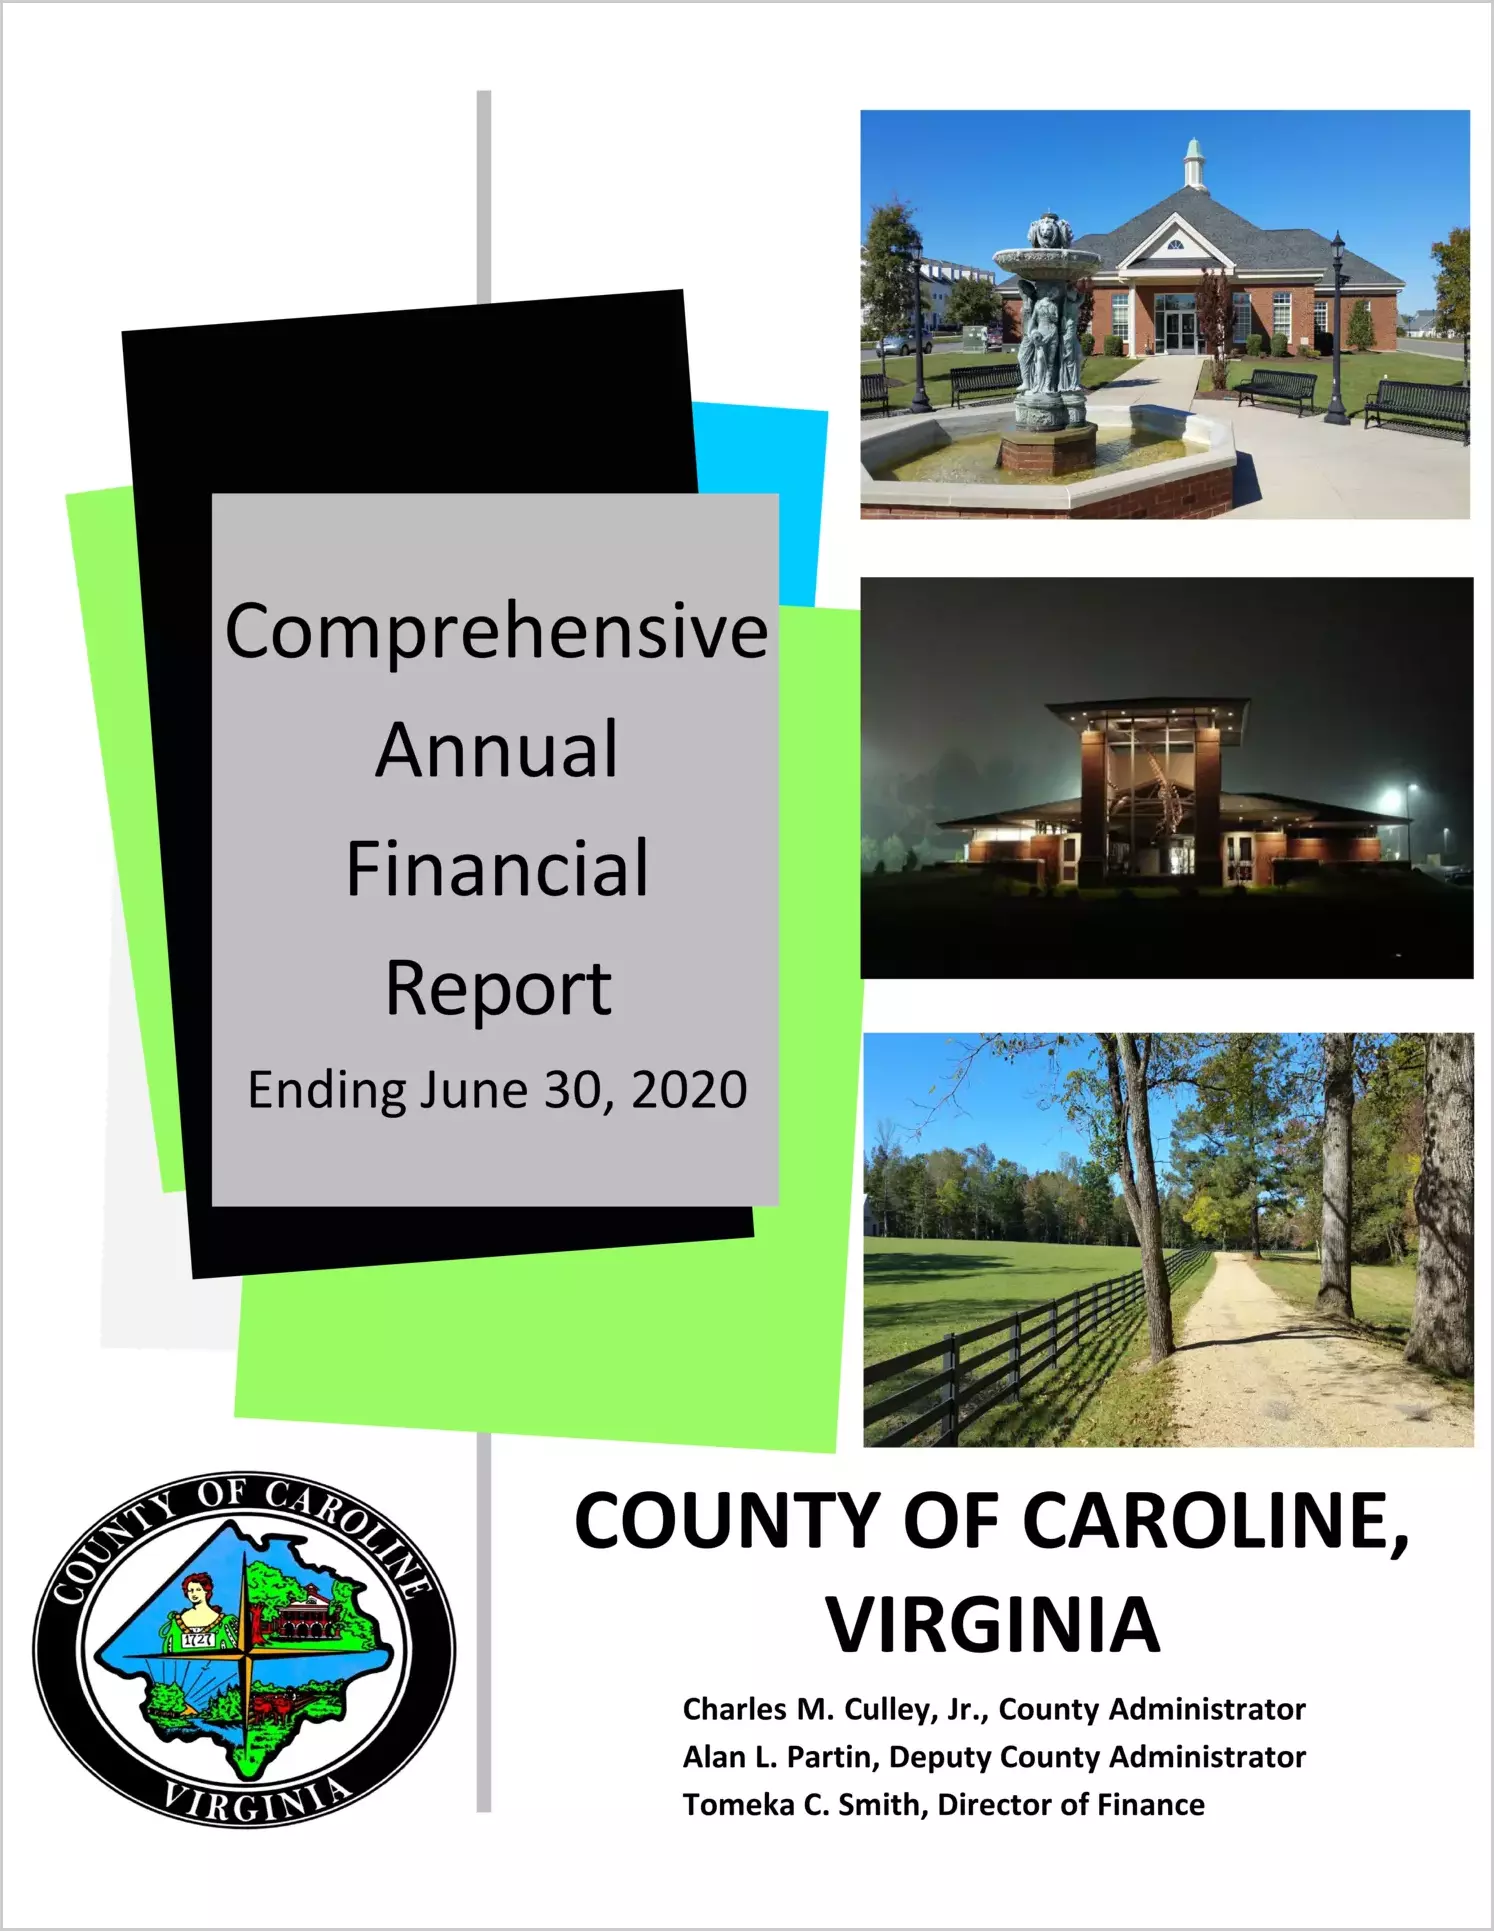 2020 Annual Financial Report for County of Caroline